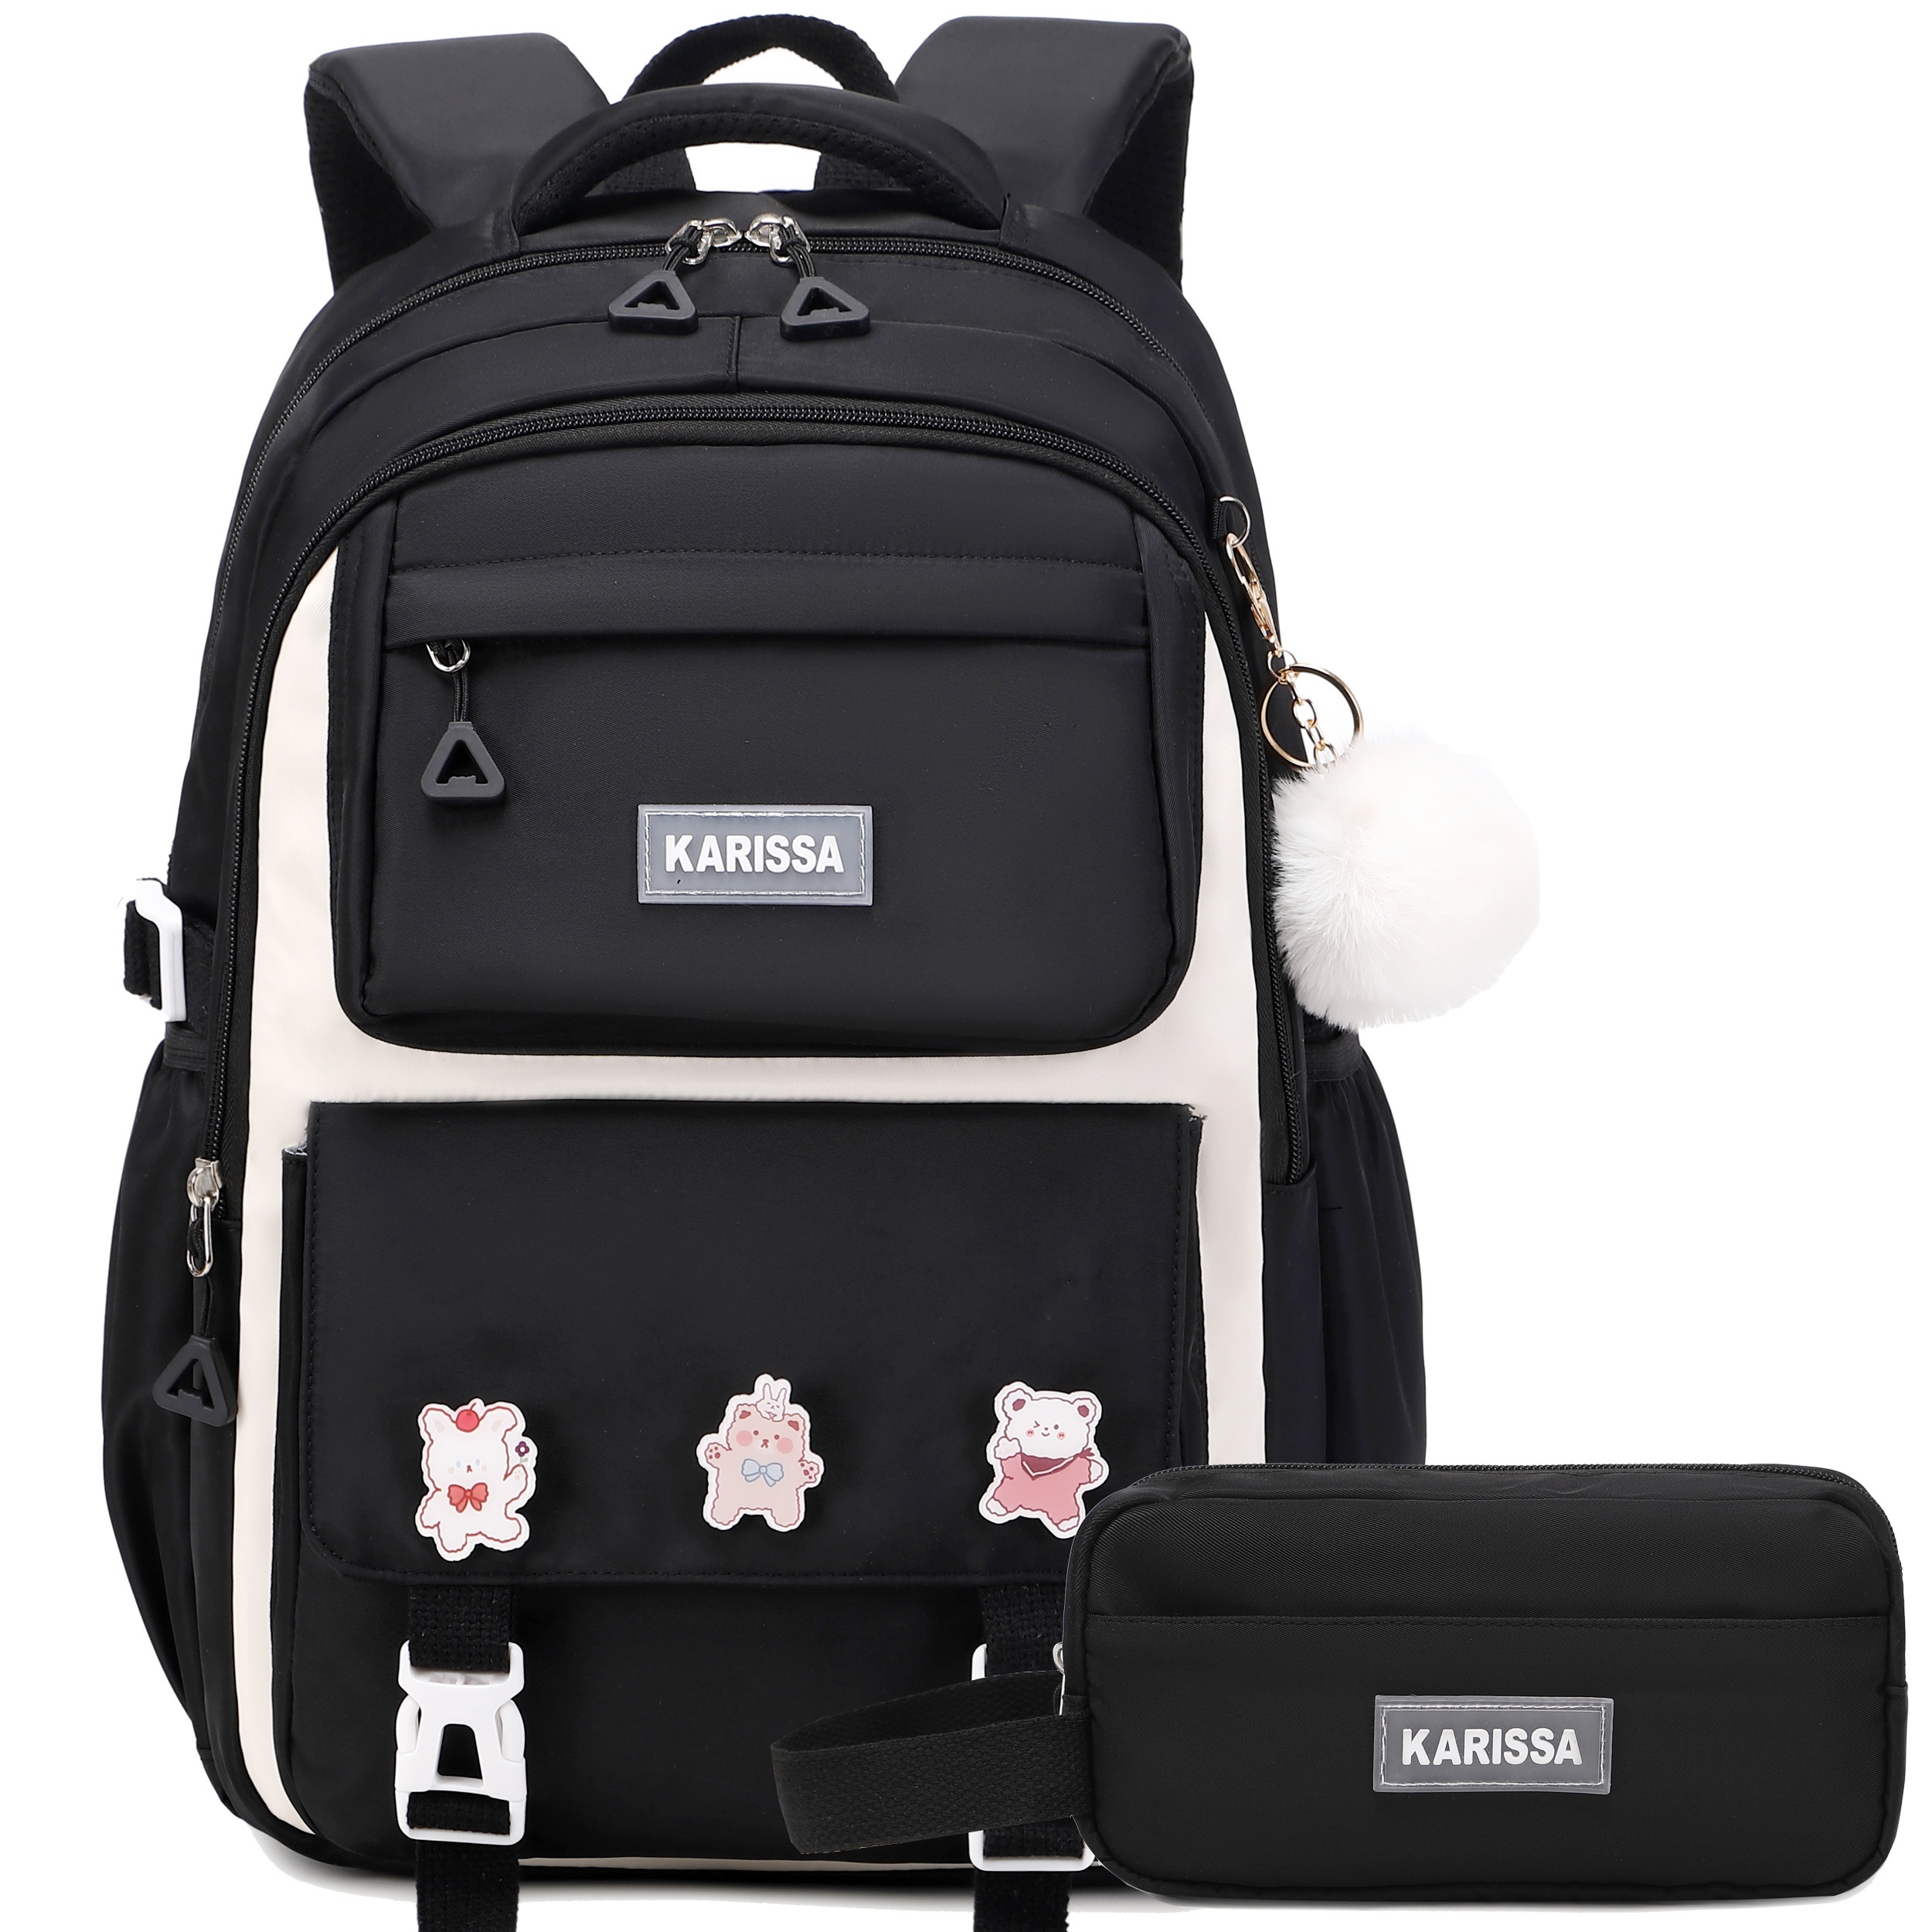 

Backpack For Girls Set With Pencil Case 15.6 Inch Laptop School Bag Cute Kids Elementary College Backpacks Large Bookbags For Women Teens Students Anti Theft Travel Daypack - Black